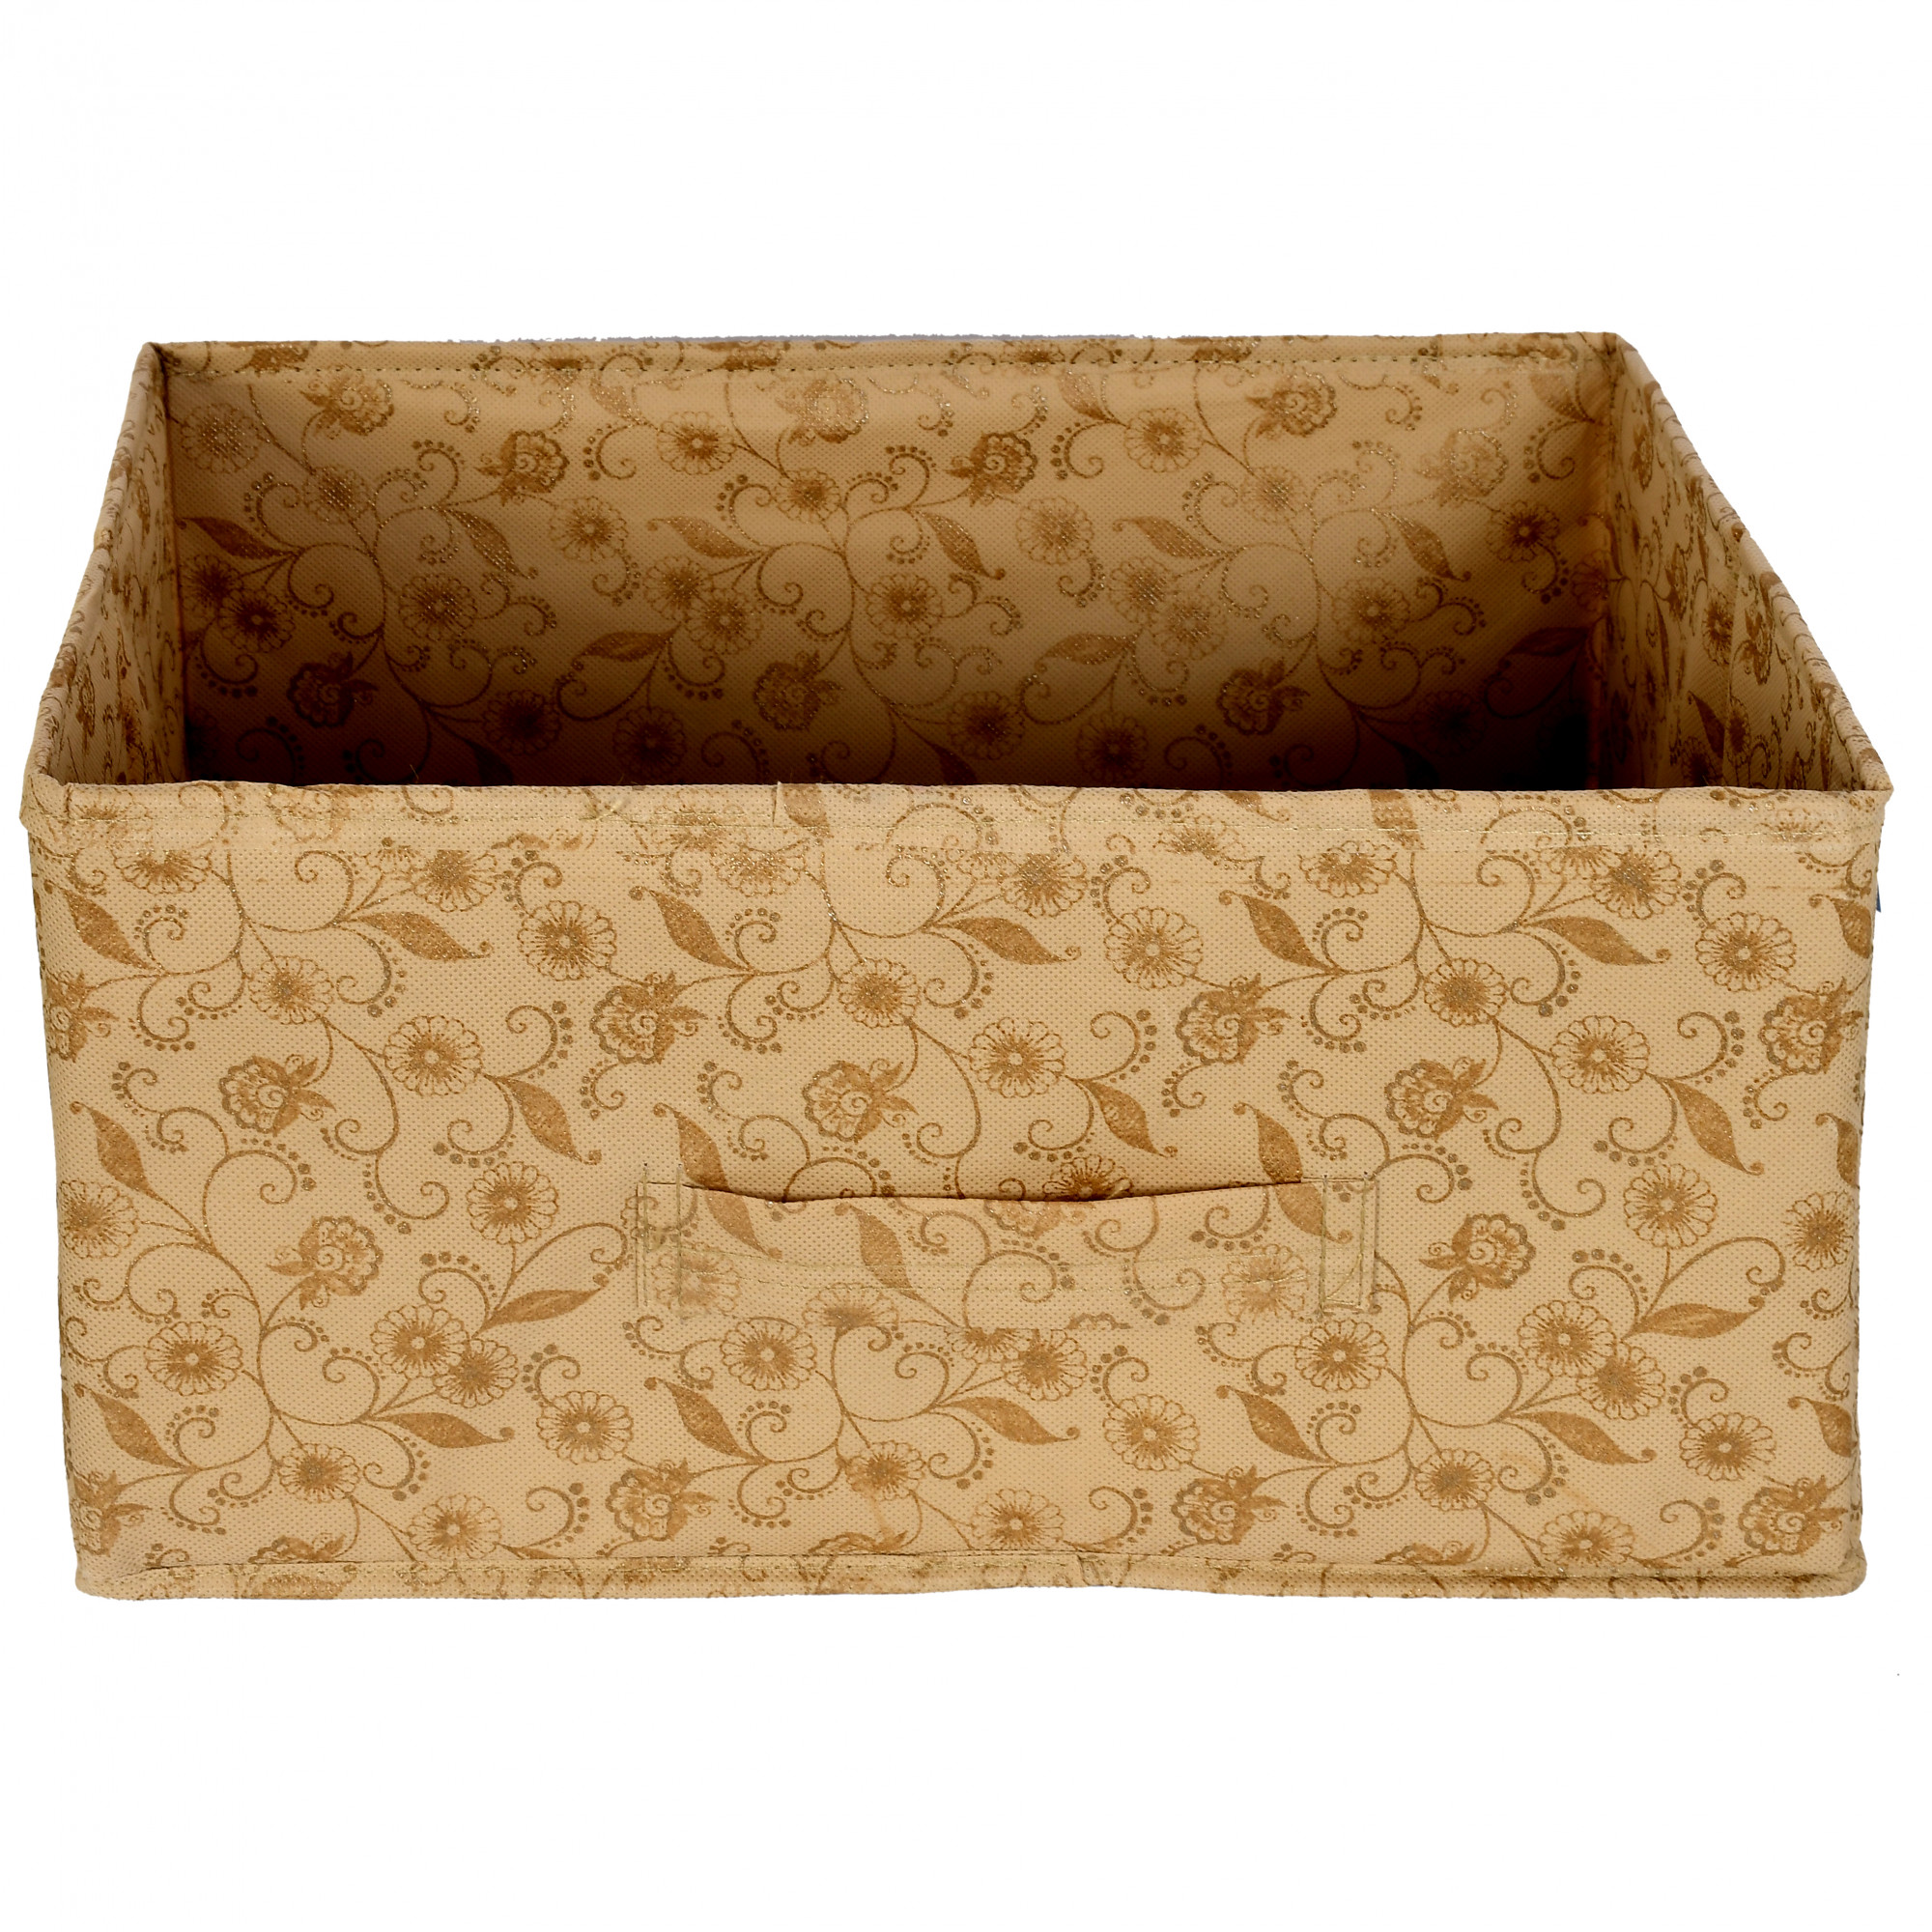 Kuber Industries Metalic Floral Print Non Woven Fabric Replacement Drawer Storage And Cloth Organizer Unit for Closet (Beige)-KUBMART3478